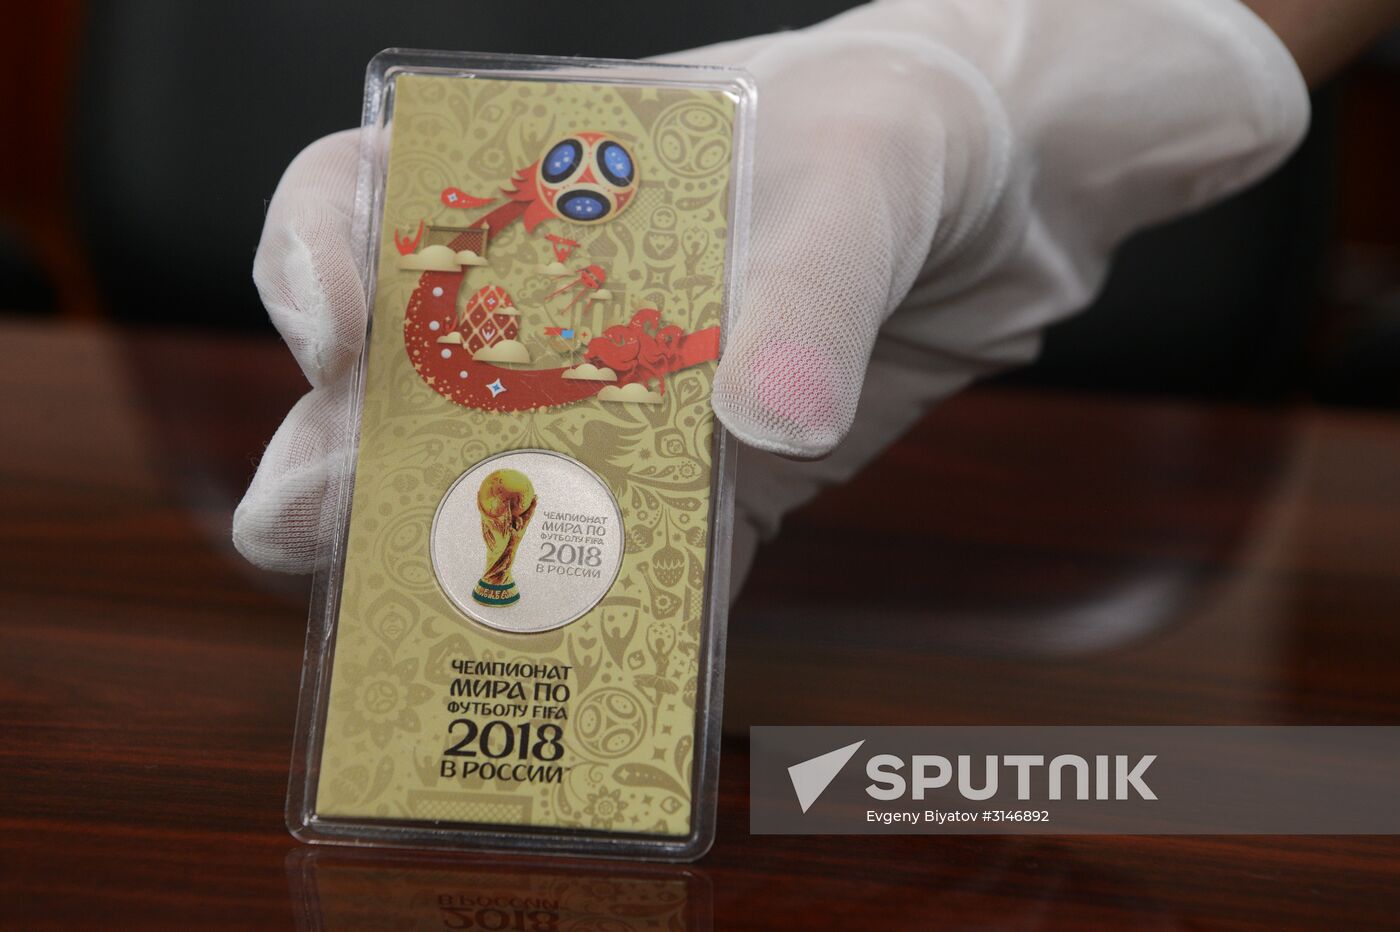 2018 FIFA World Cup commemorative coins